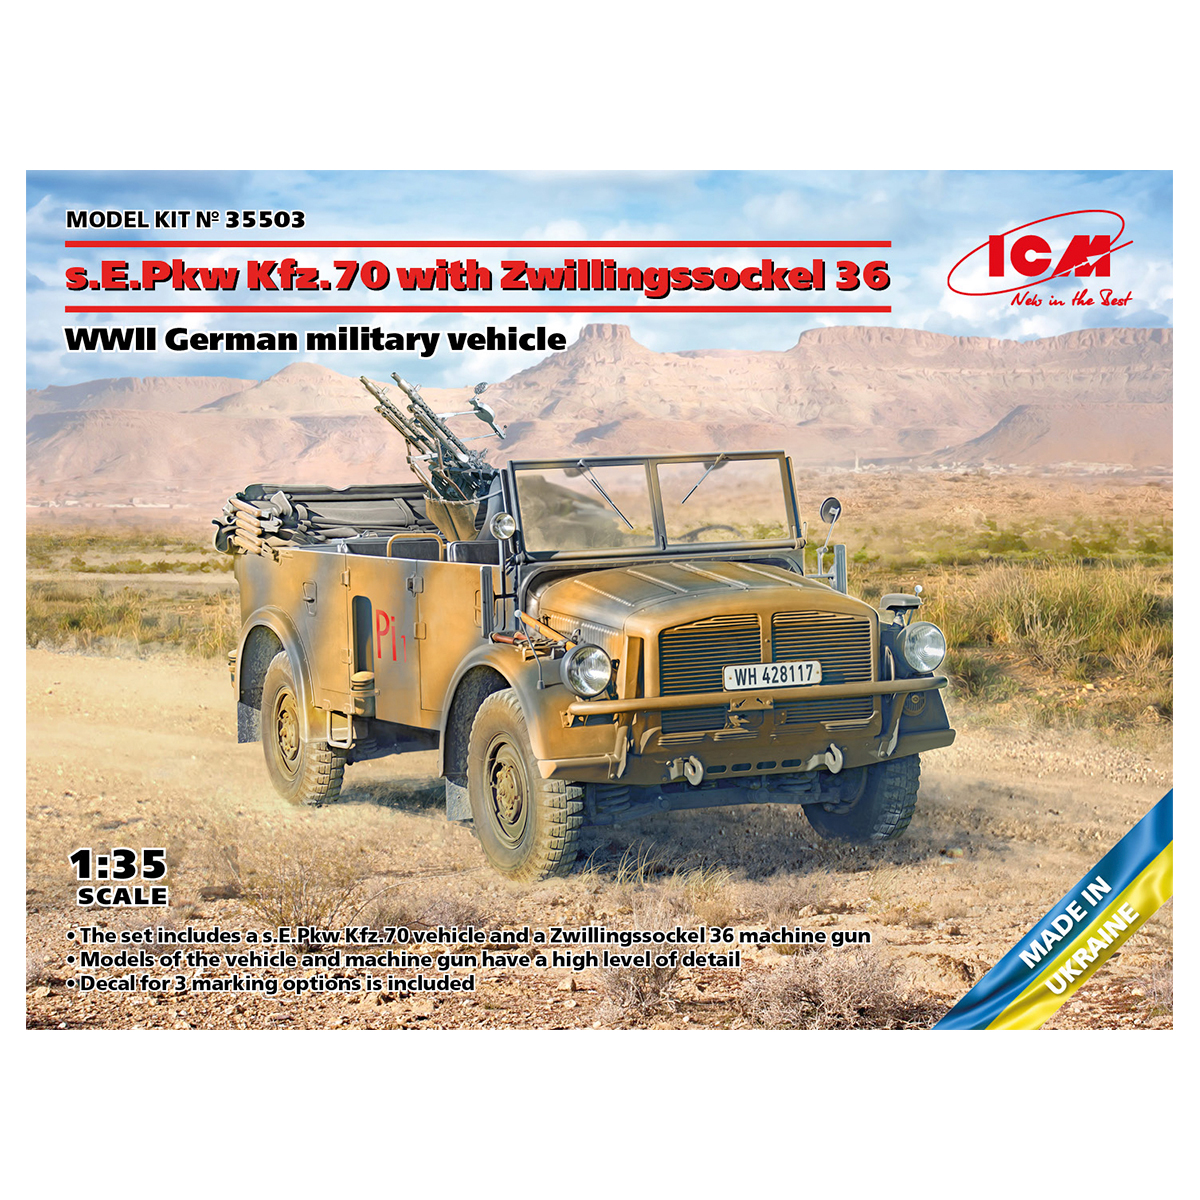 s.E.Pkw Kfz.70 with Zwillingssockel 36, WWII German military vehicle 1/35